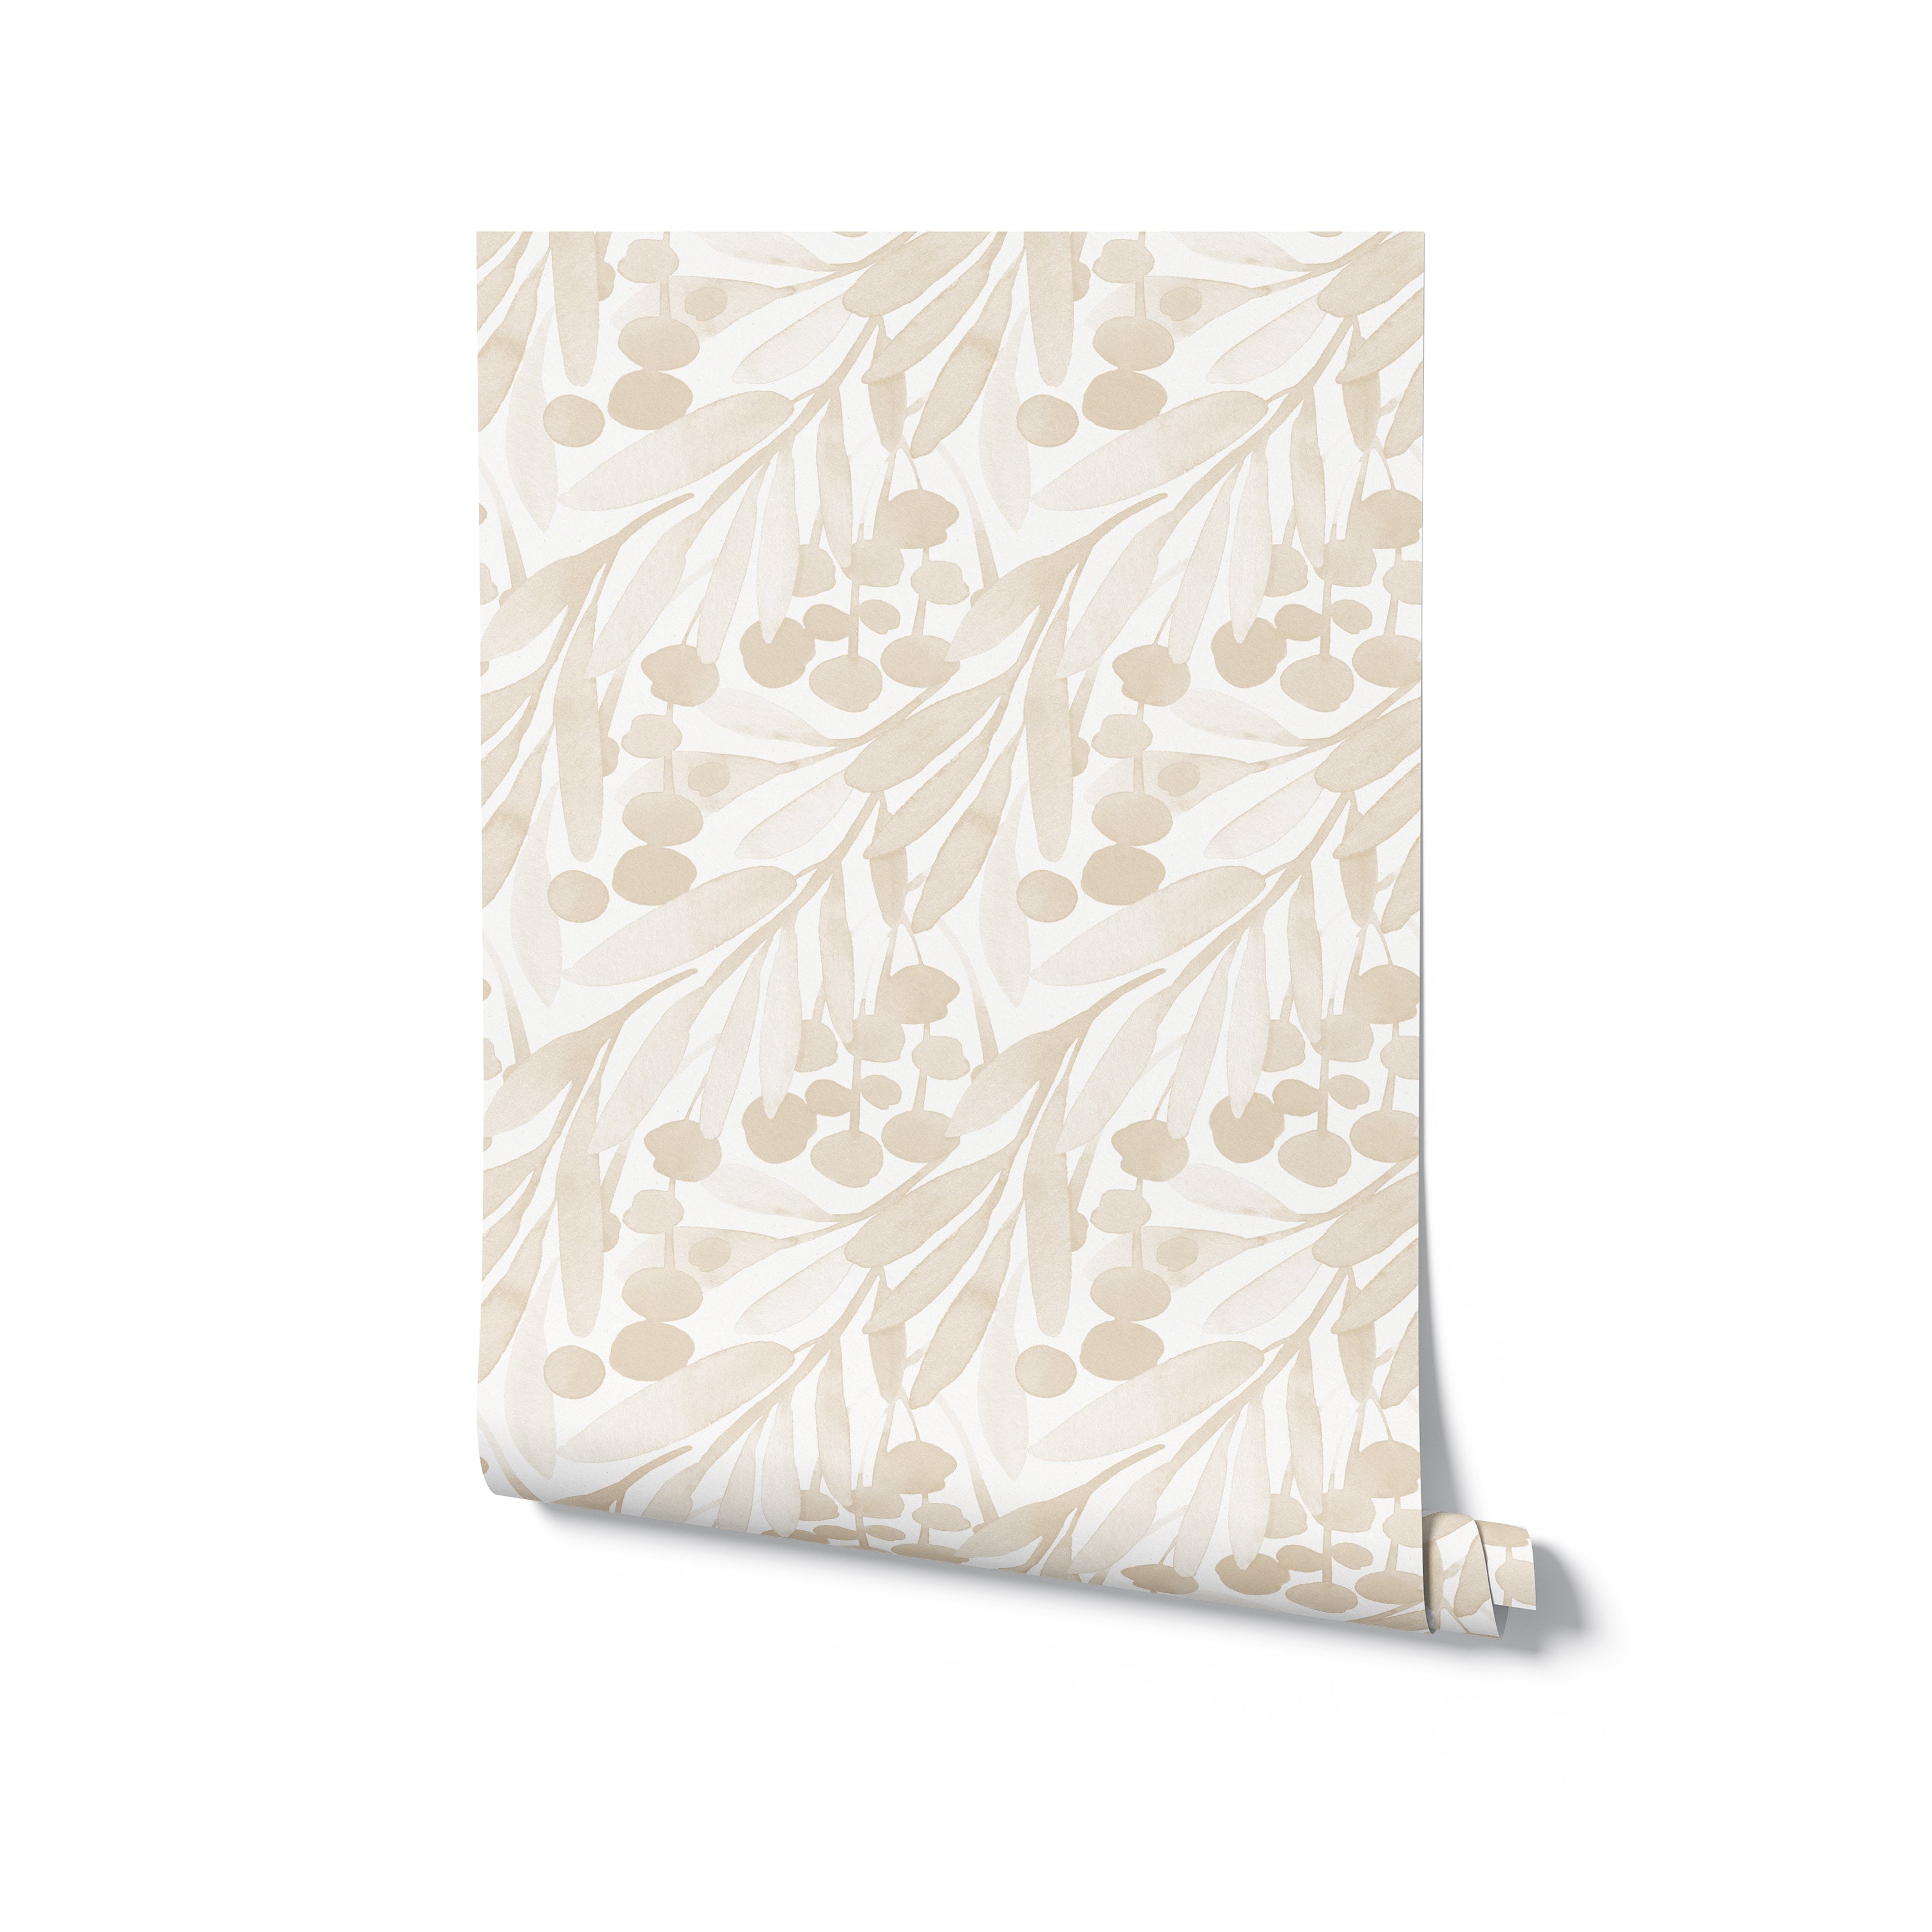 A roll of Watercolour Botanical Wallpaper, featuring an elegant pattern of soft beige leaves and round berries, beautifully rendered in watercolour. This wallpaper adds a touch of understated elegance to walls, perfect for sophisticated interior designs